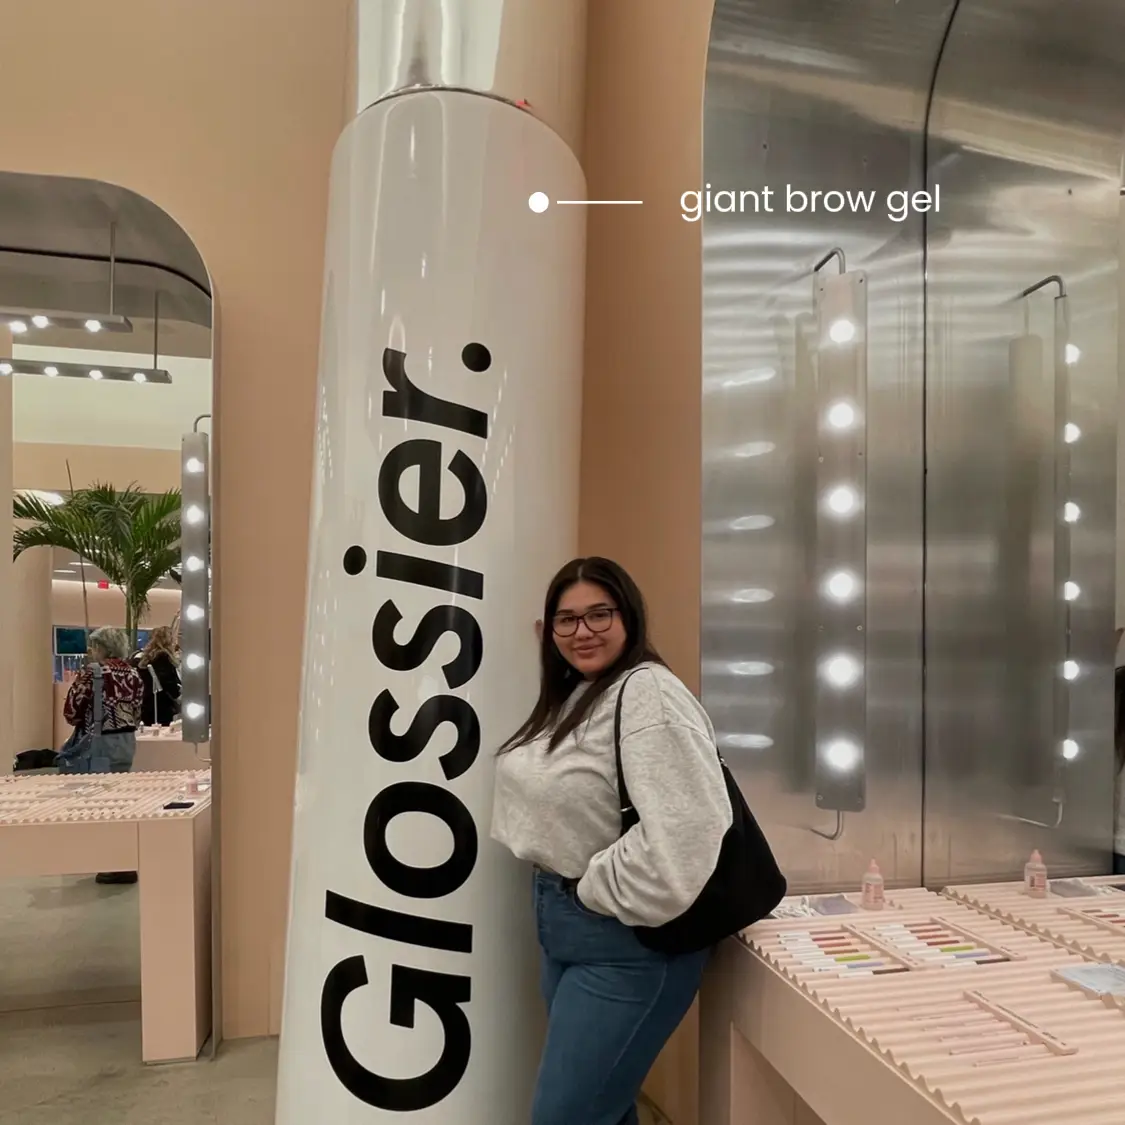 glossier haul 🧸🎀, Gallery posted by 𖠋